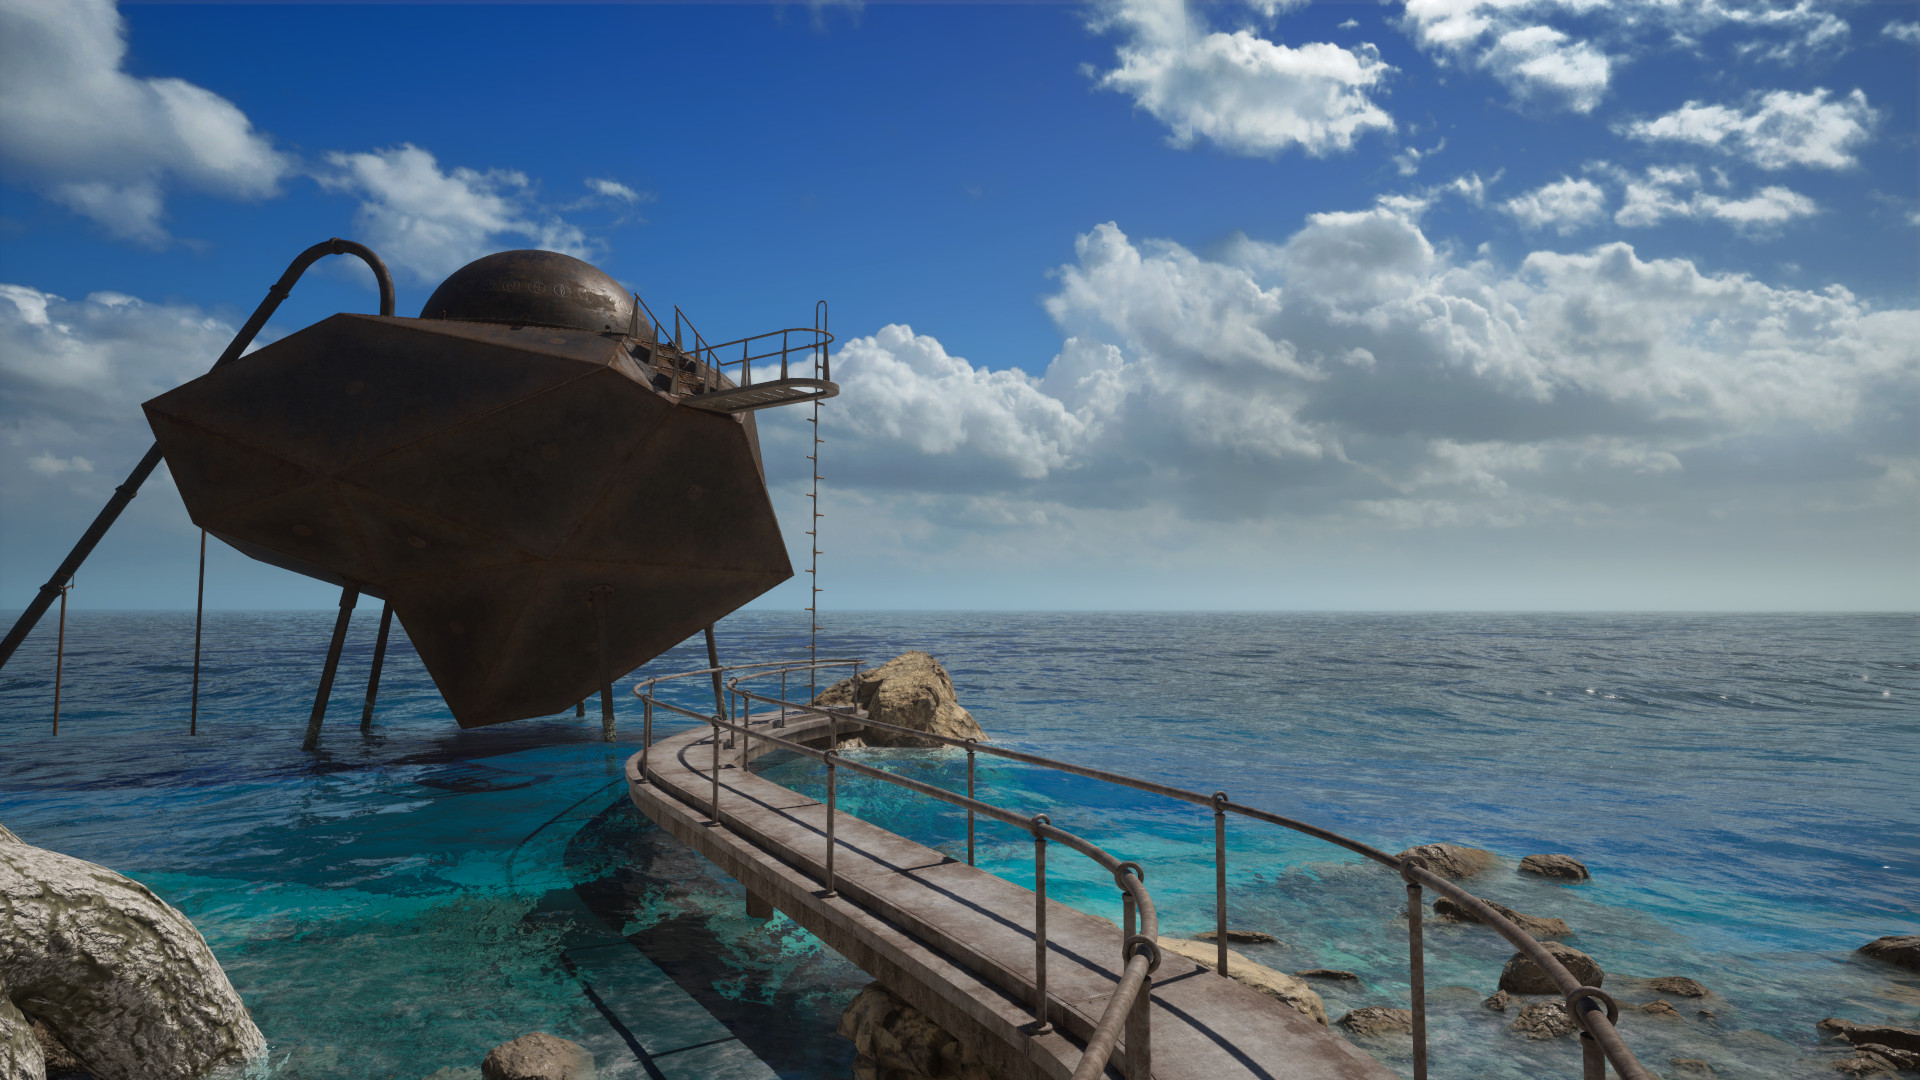 Riven Remake brings the fully 3D Myst sequel to PC and VR